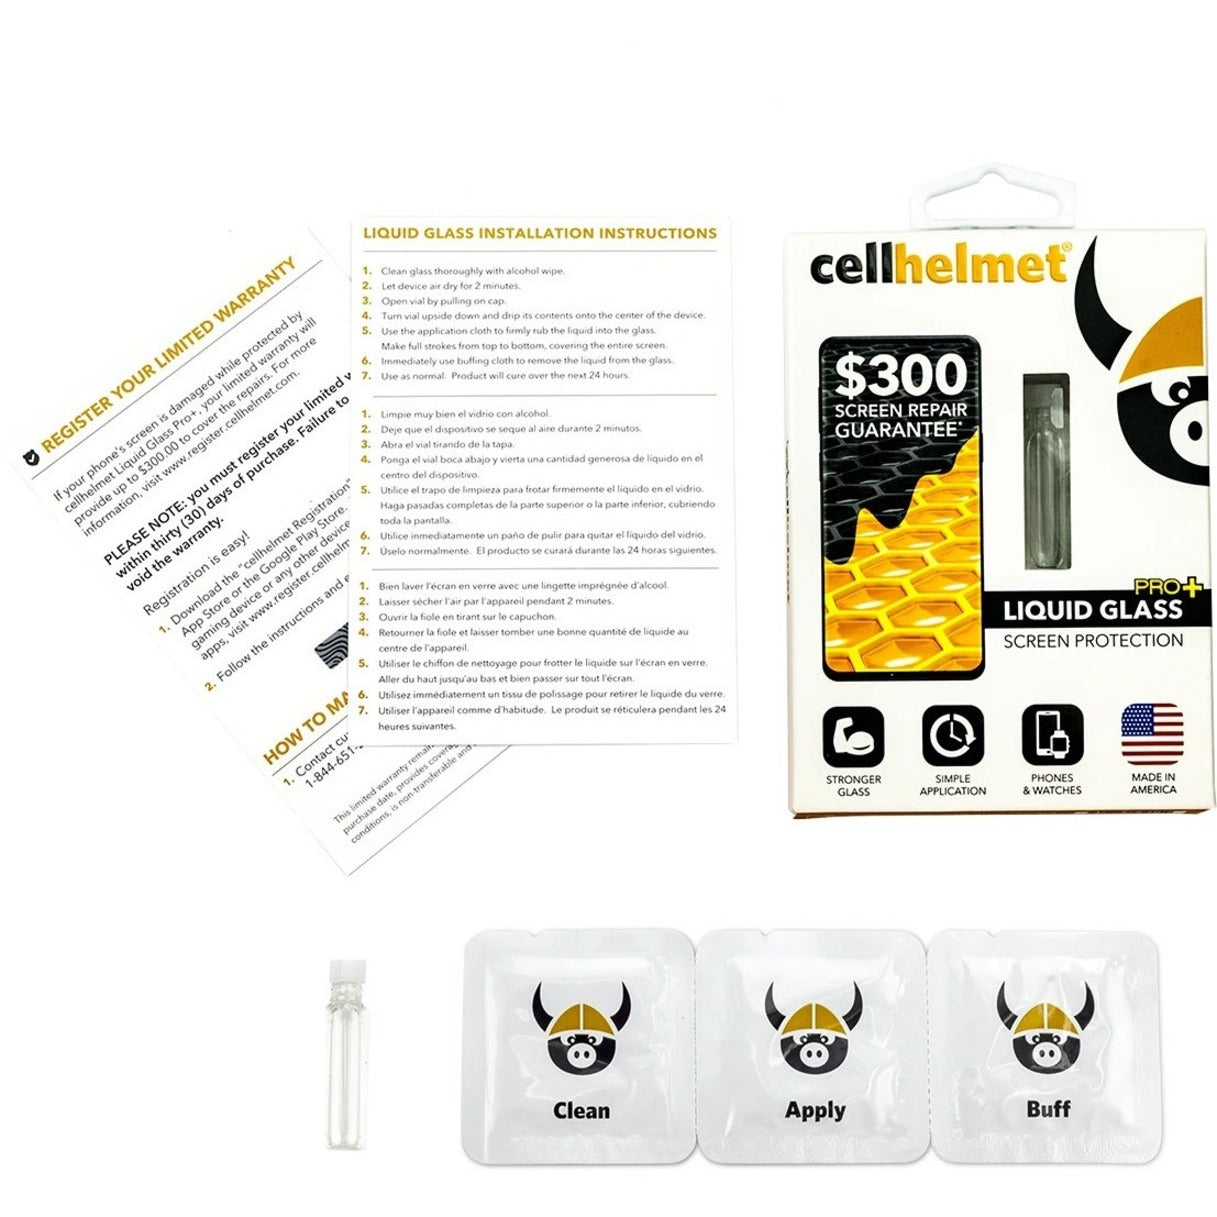 Cellhelmet LSP-PHONE-PRO-PLUS Liquid Glass Pro+ Screen Protector, Protect Your Smartphone, Tablet, and Smartwatch with Advanced Liquid Screen Protection [Discontinued]